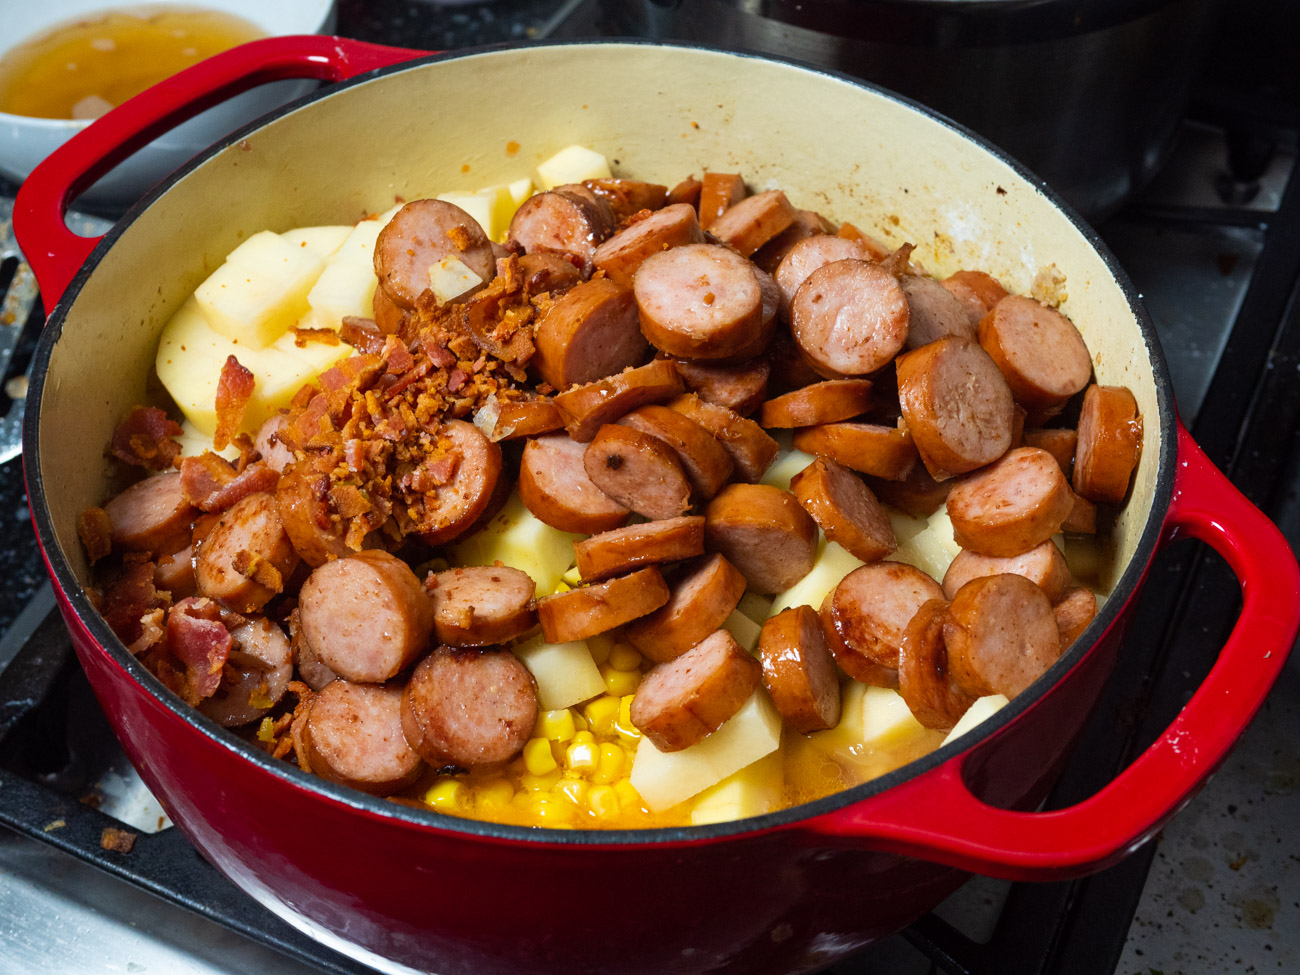 Add tomatoes, baked beans, green chiles, corn, potatoes, bacon, sausage, and water. Bring to a boil, then reduce heat and simmer, covered for about an hour, stirring occasionally.